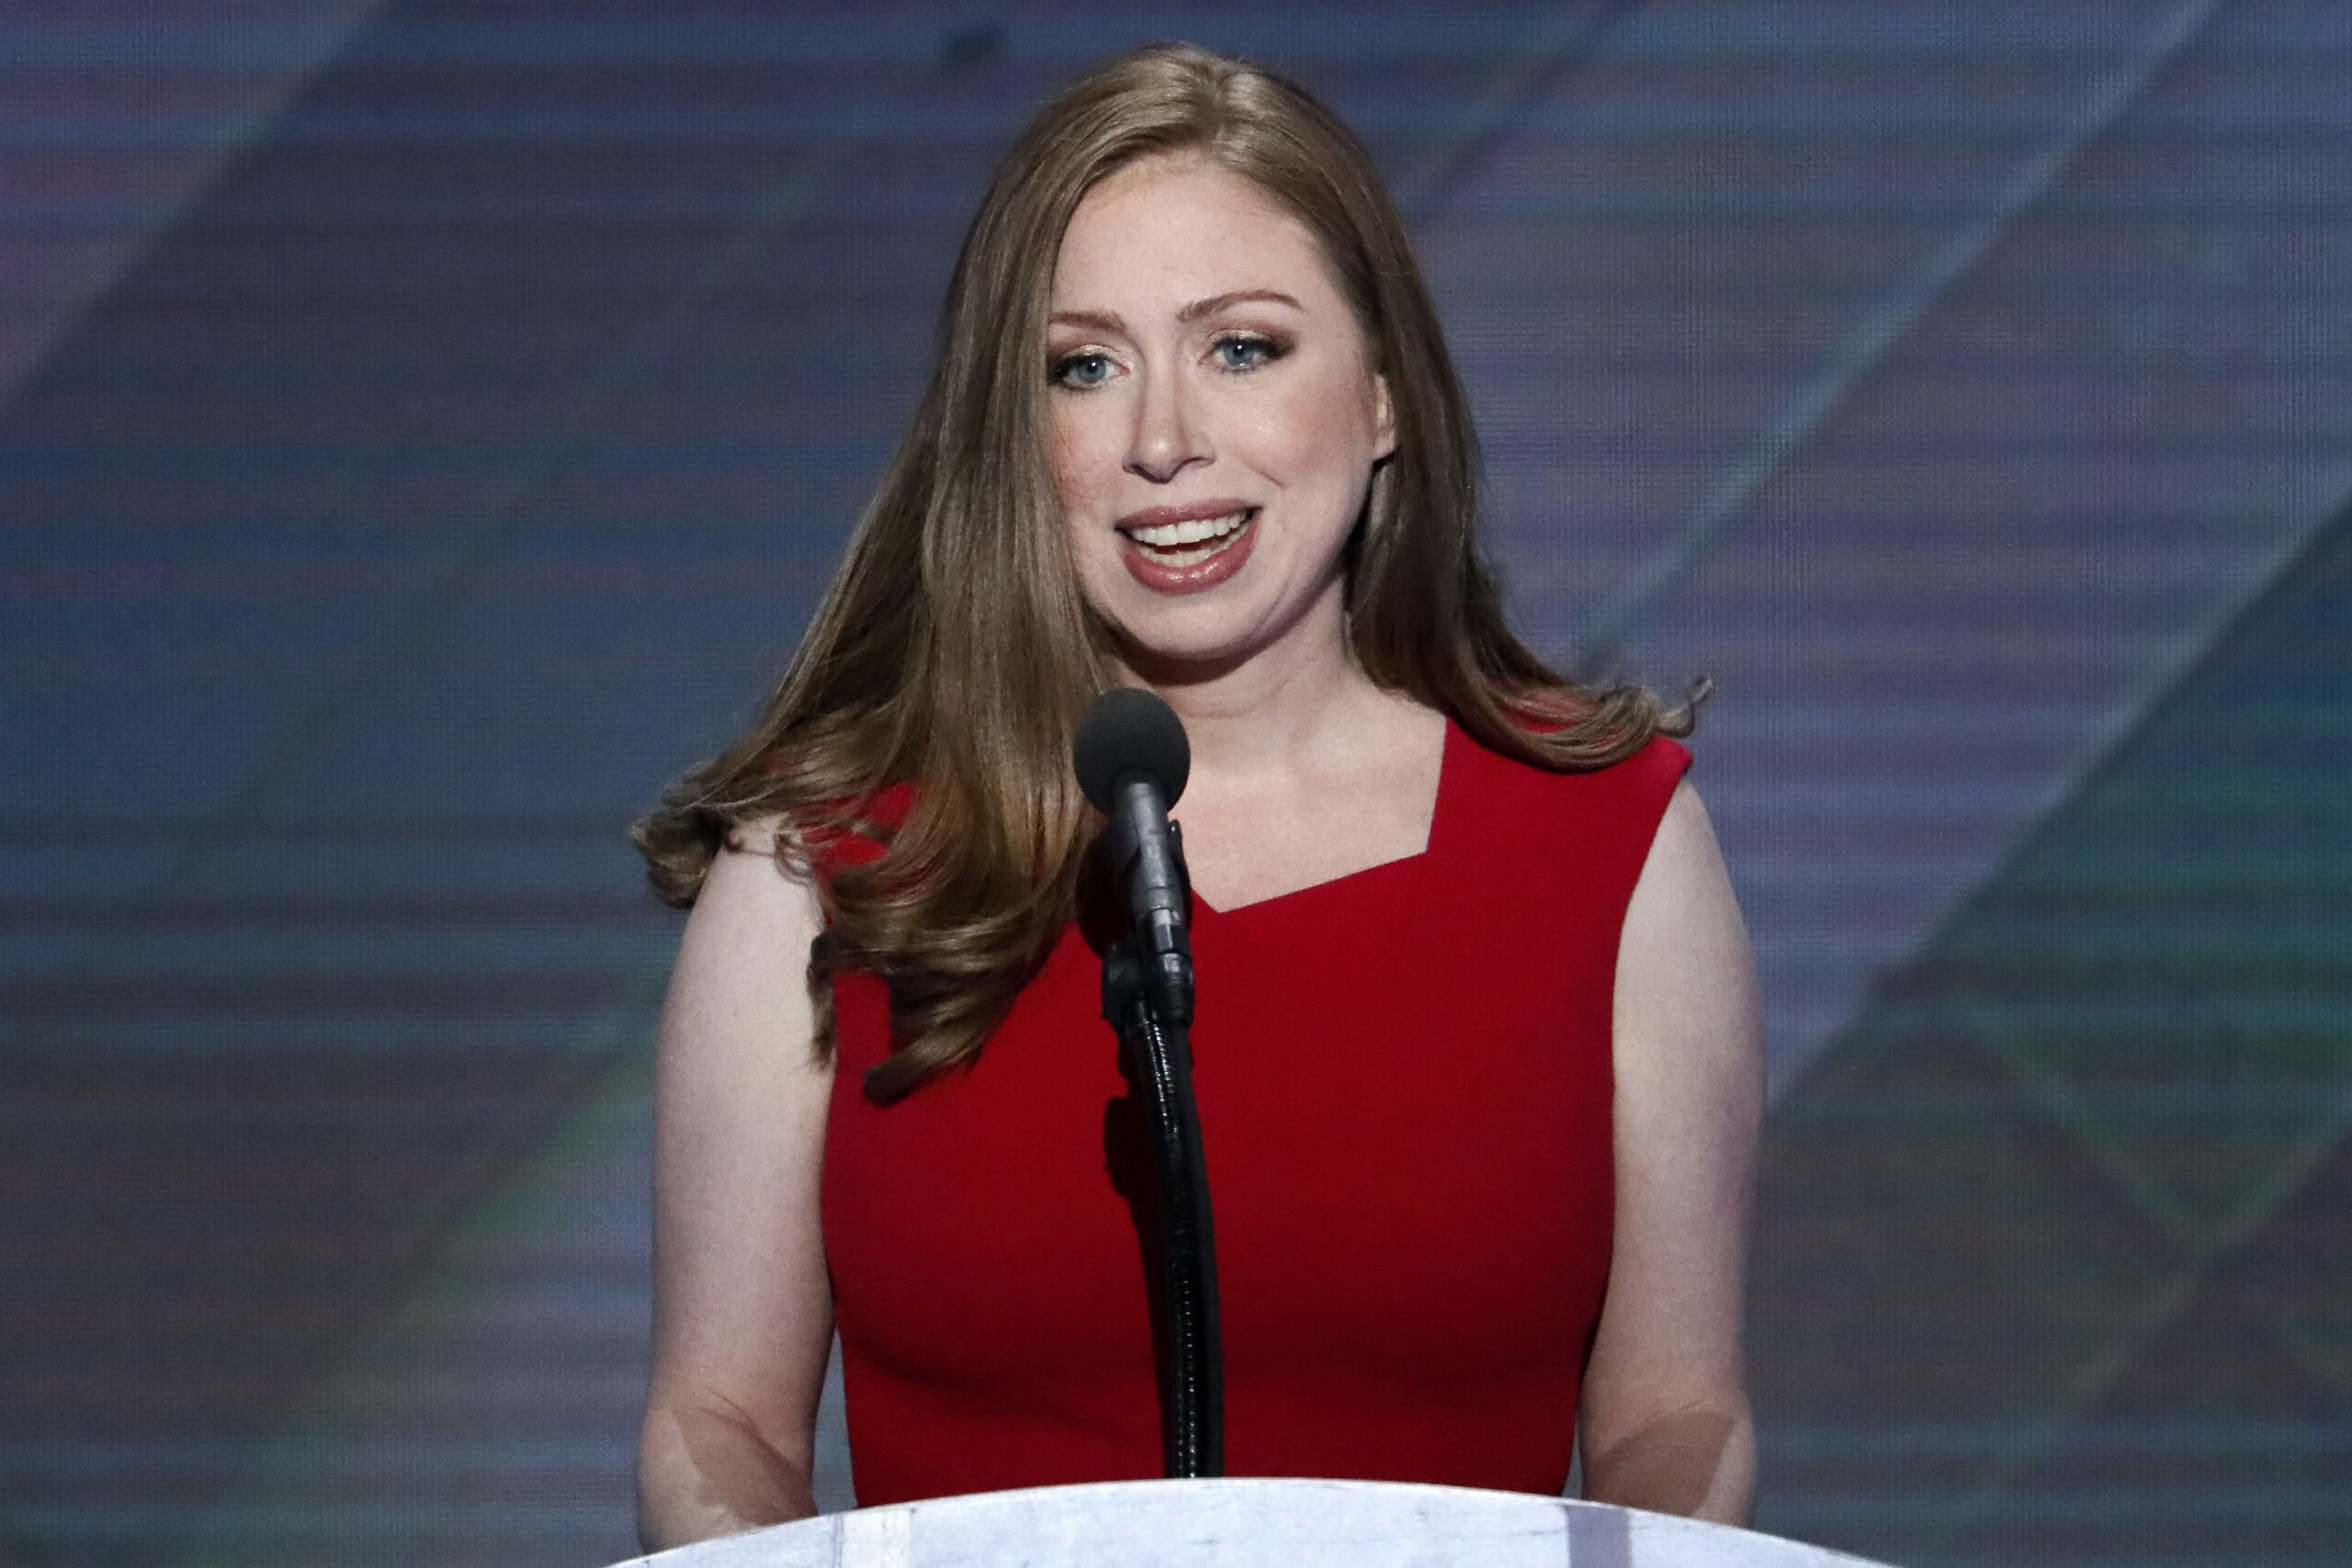 Chelsea Clinton Pushes Hillary’s Agenda, Bashes Trump’s ‘Hate Speech’ In Green Bay Stop